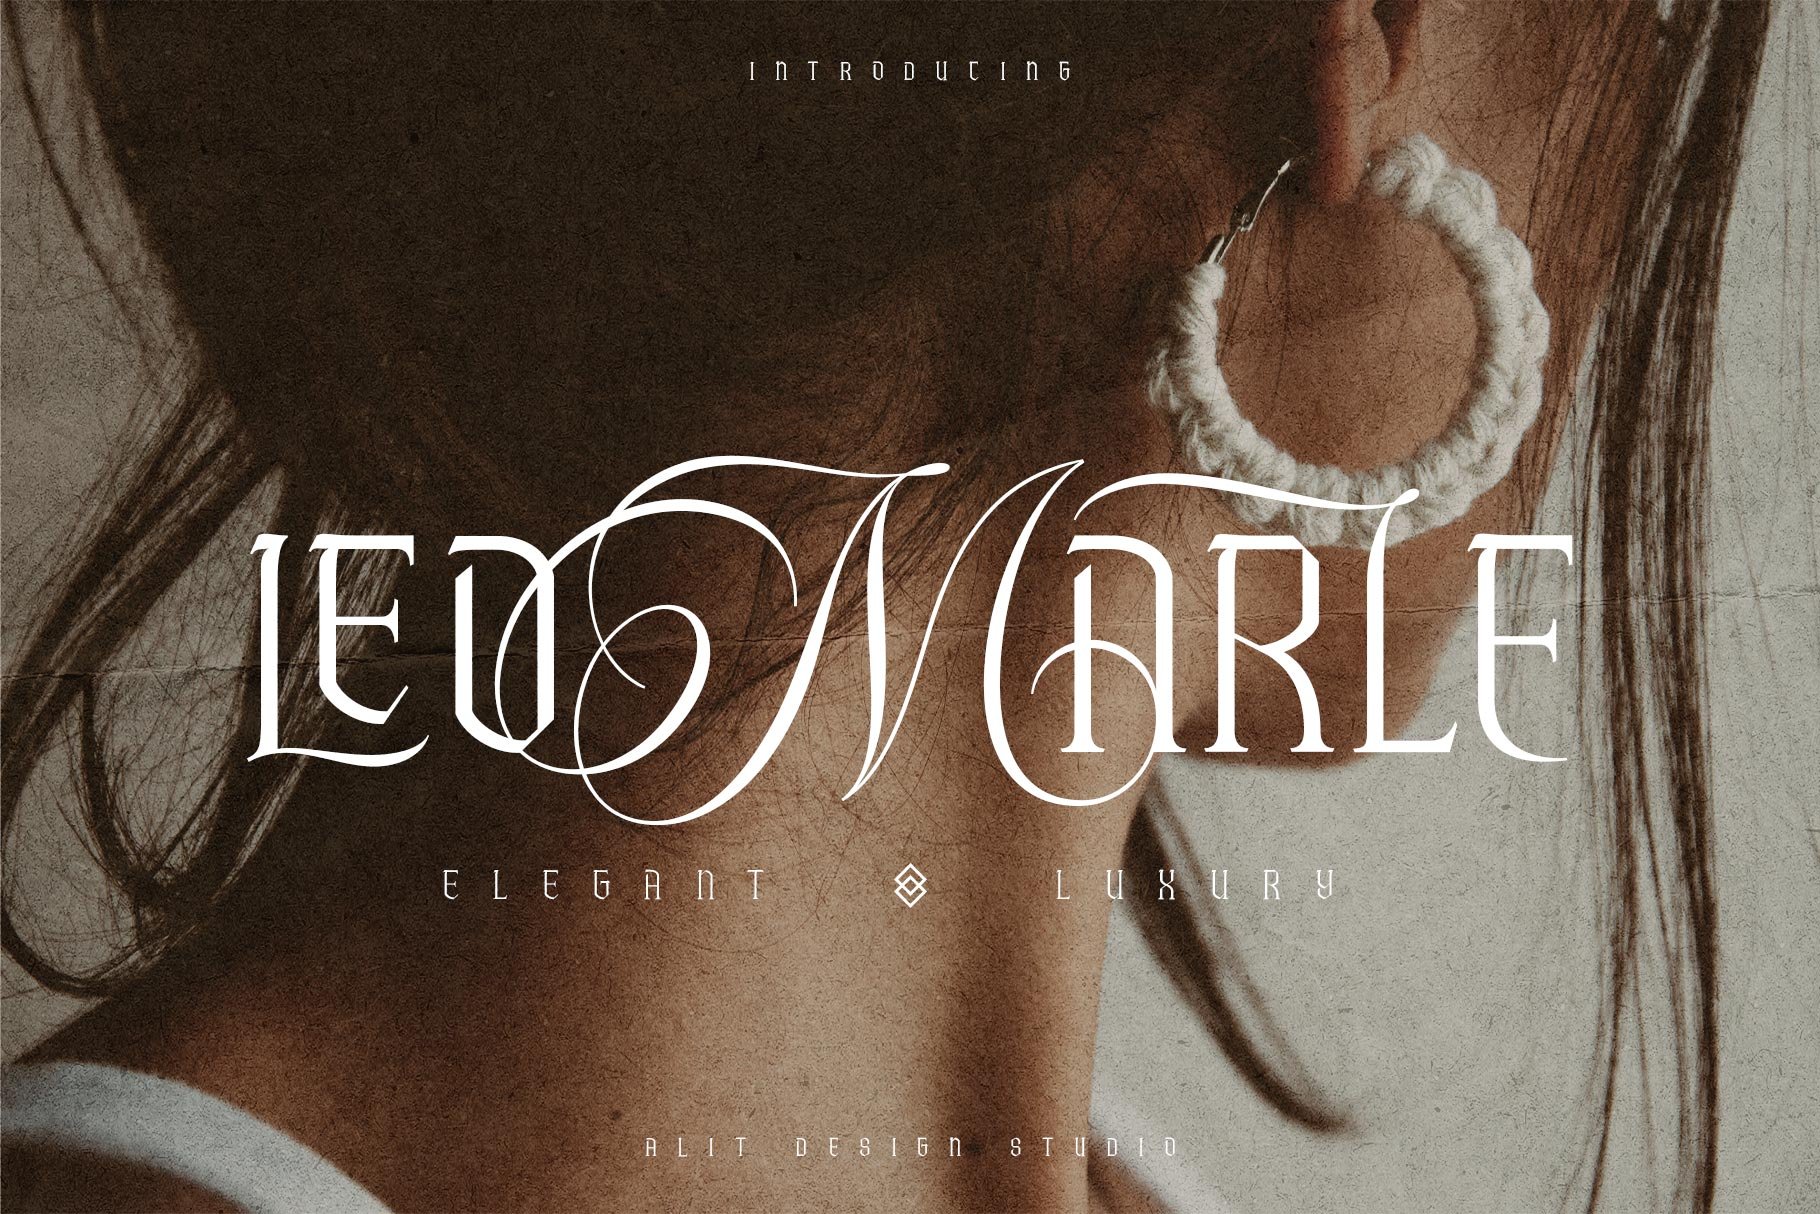 Leomarle Typeface cover image.